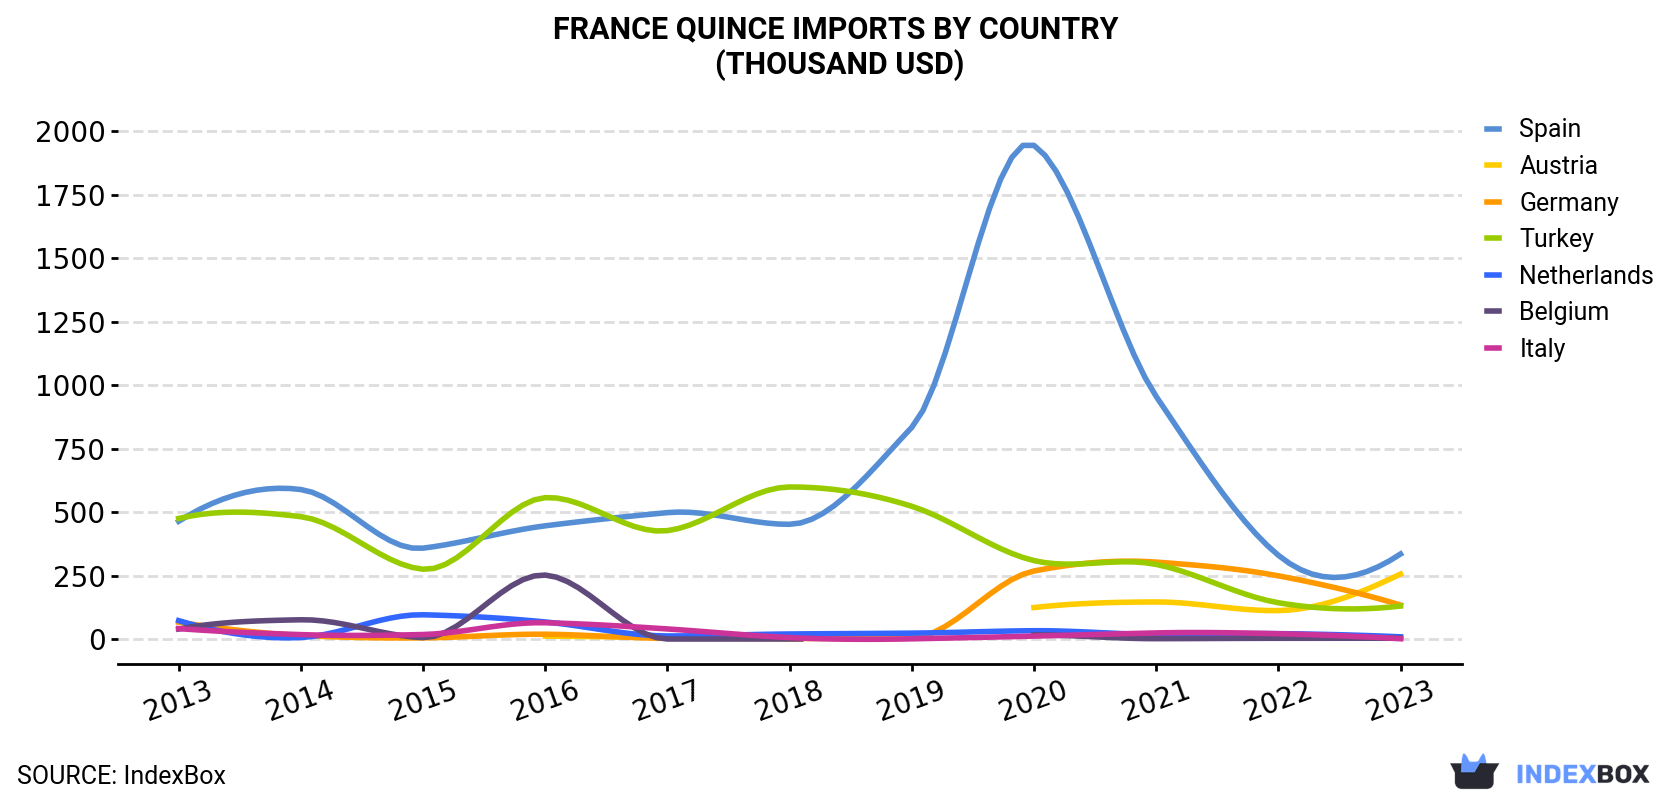 France Quince Imports By Country (Thousand USD)